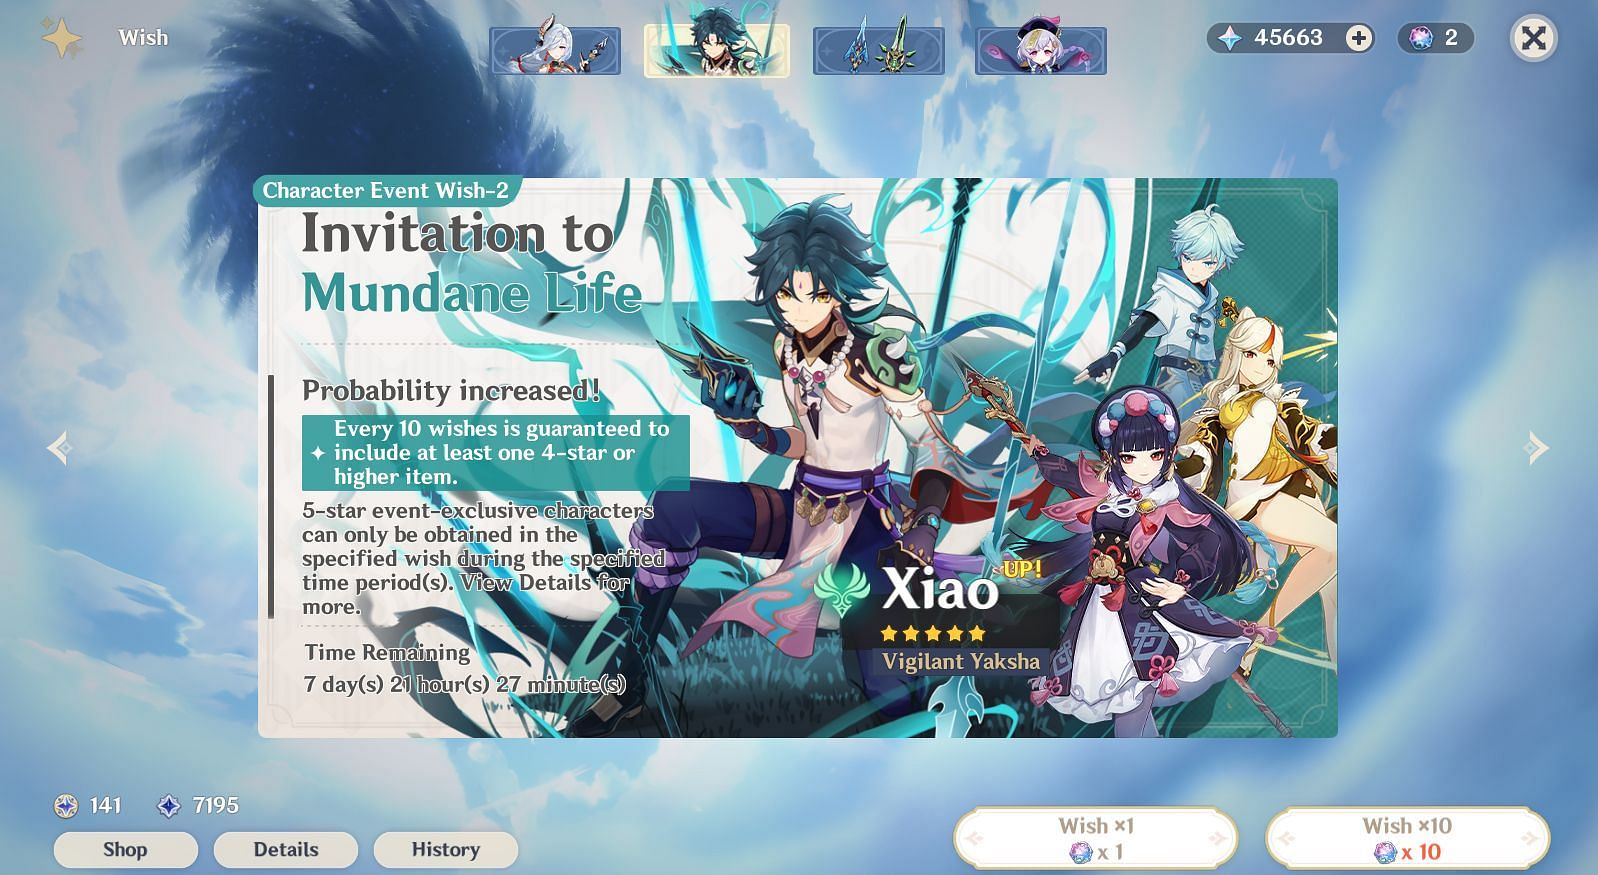 Current Character Event Wish-2 banner (Image via miHoYo)